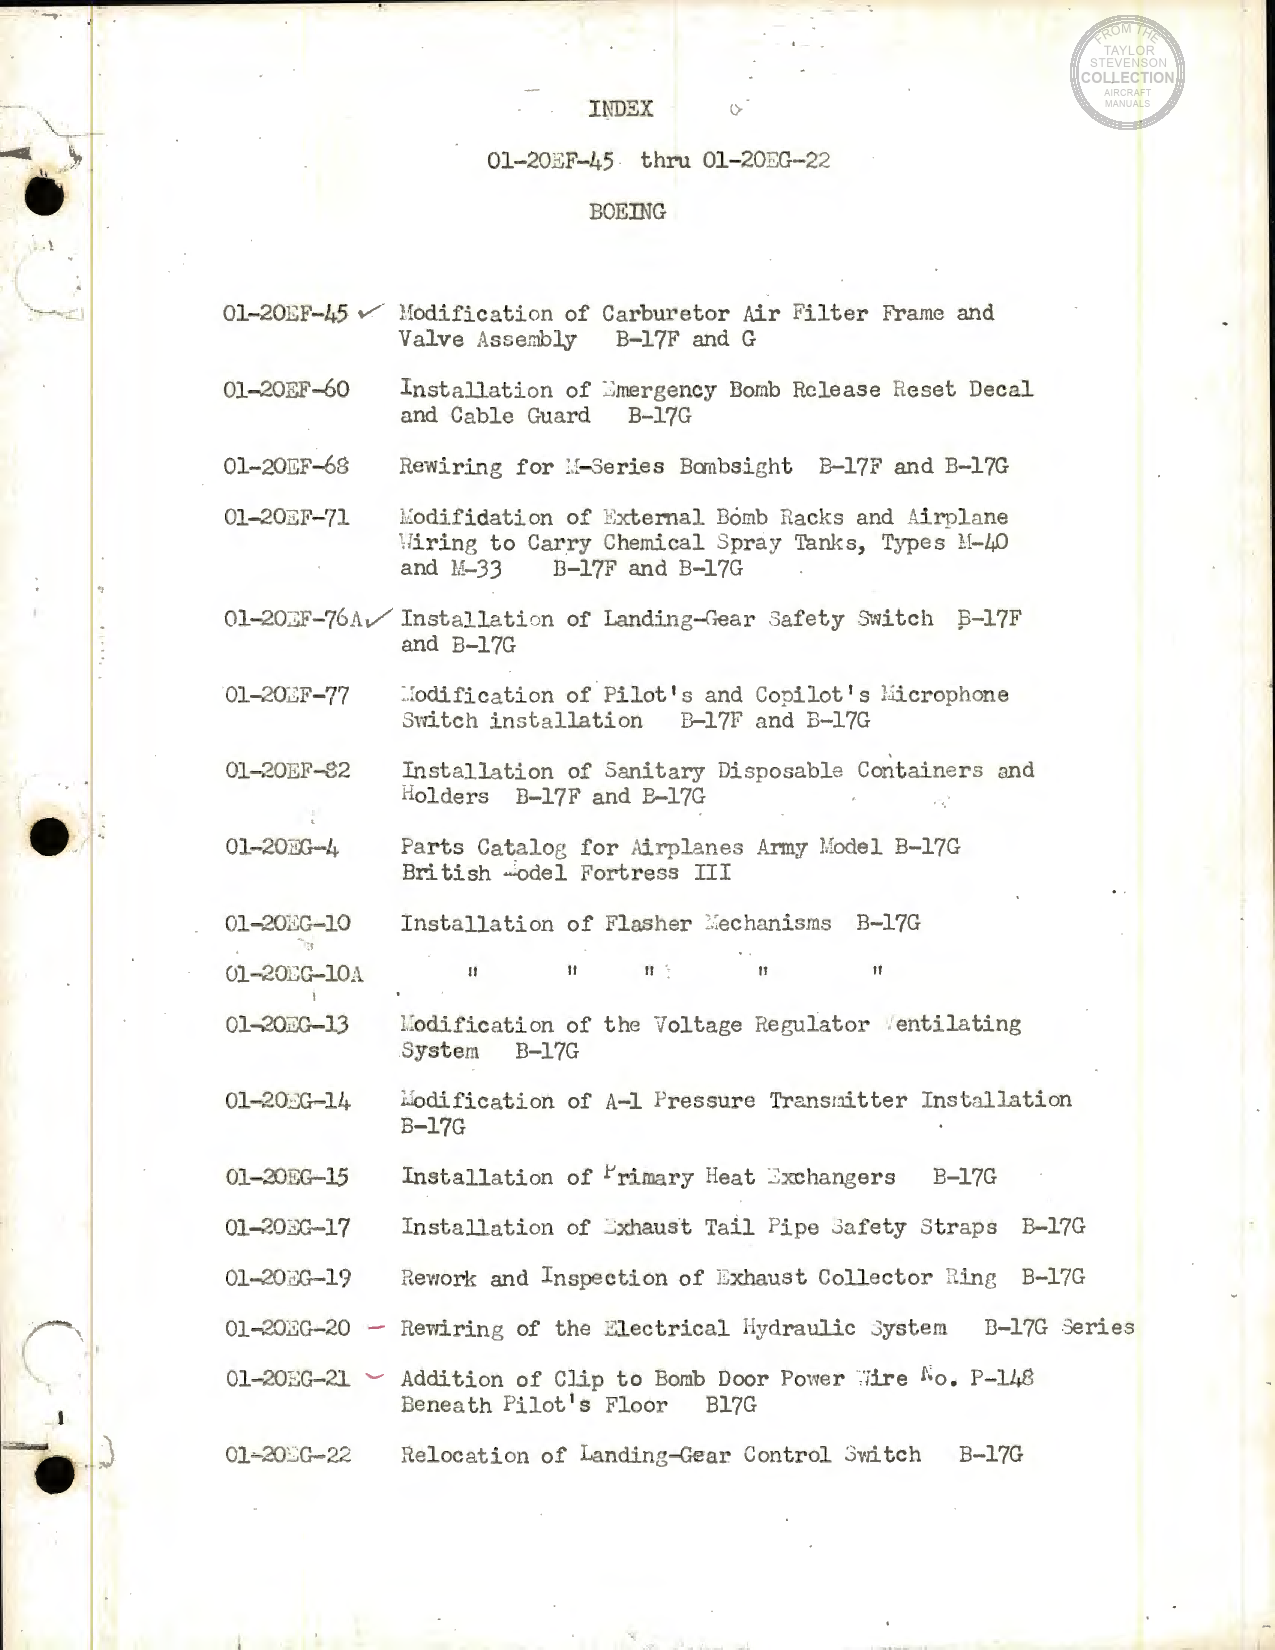 Sample page 1 from AirCorps Library document: B-17 Preflight Checklists and Starting Procedures